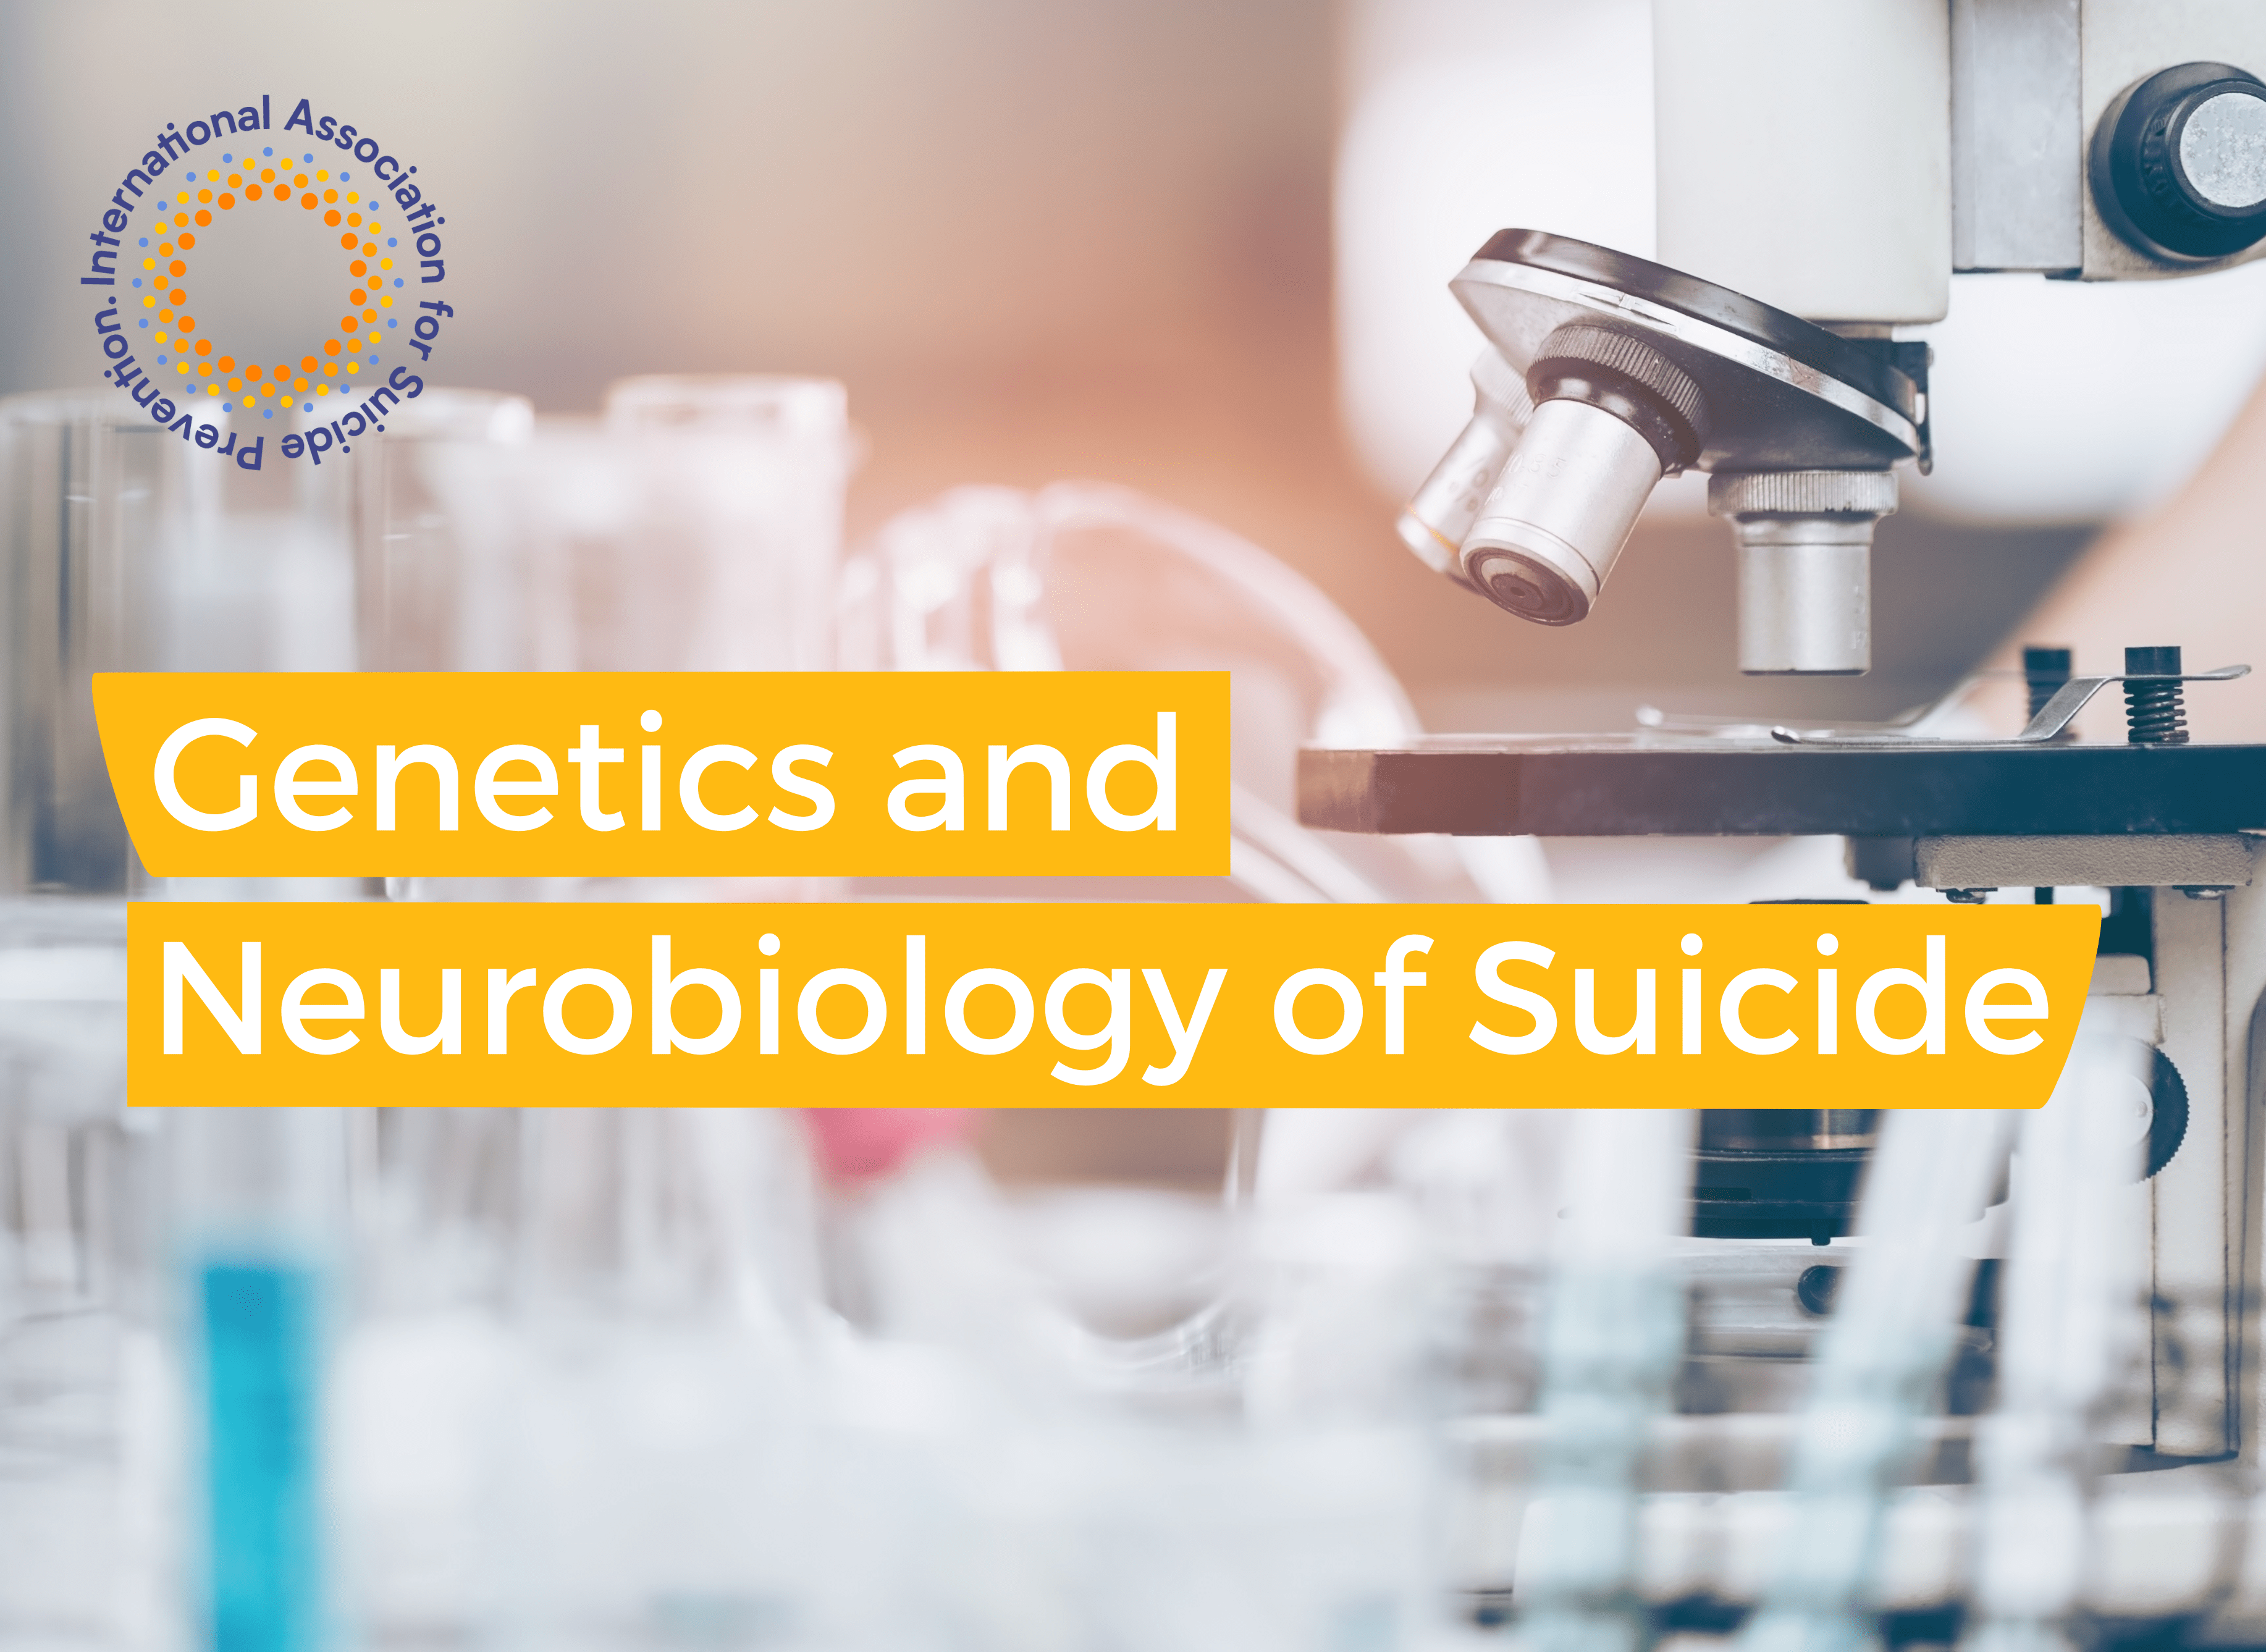 Genetics and Neurobiology of Suicide